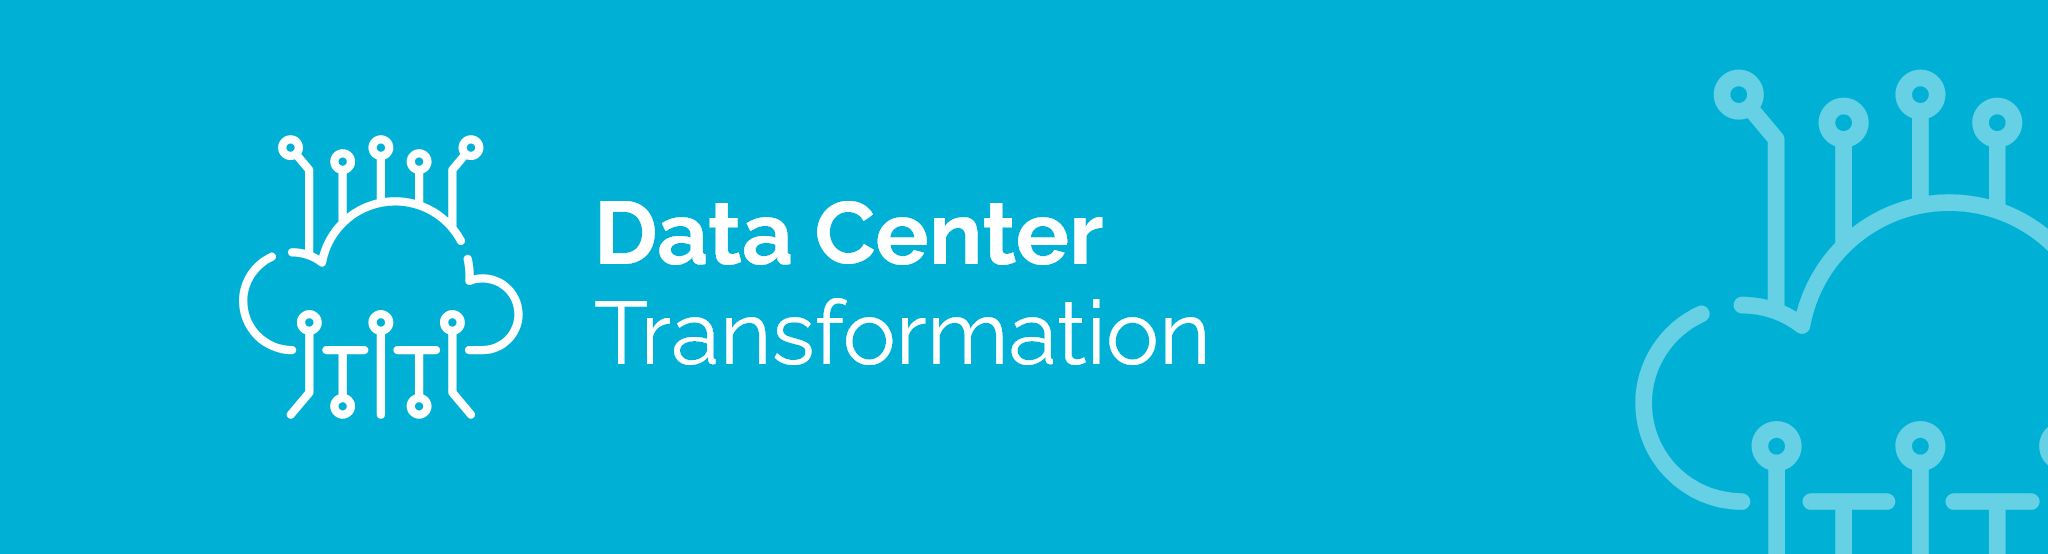 Data Center Transformation Services | Resemble Systems